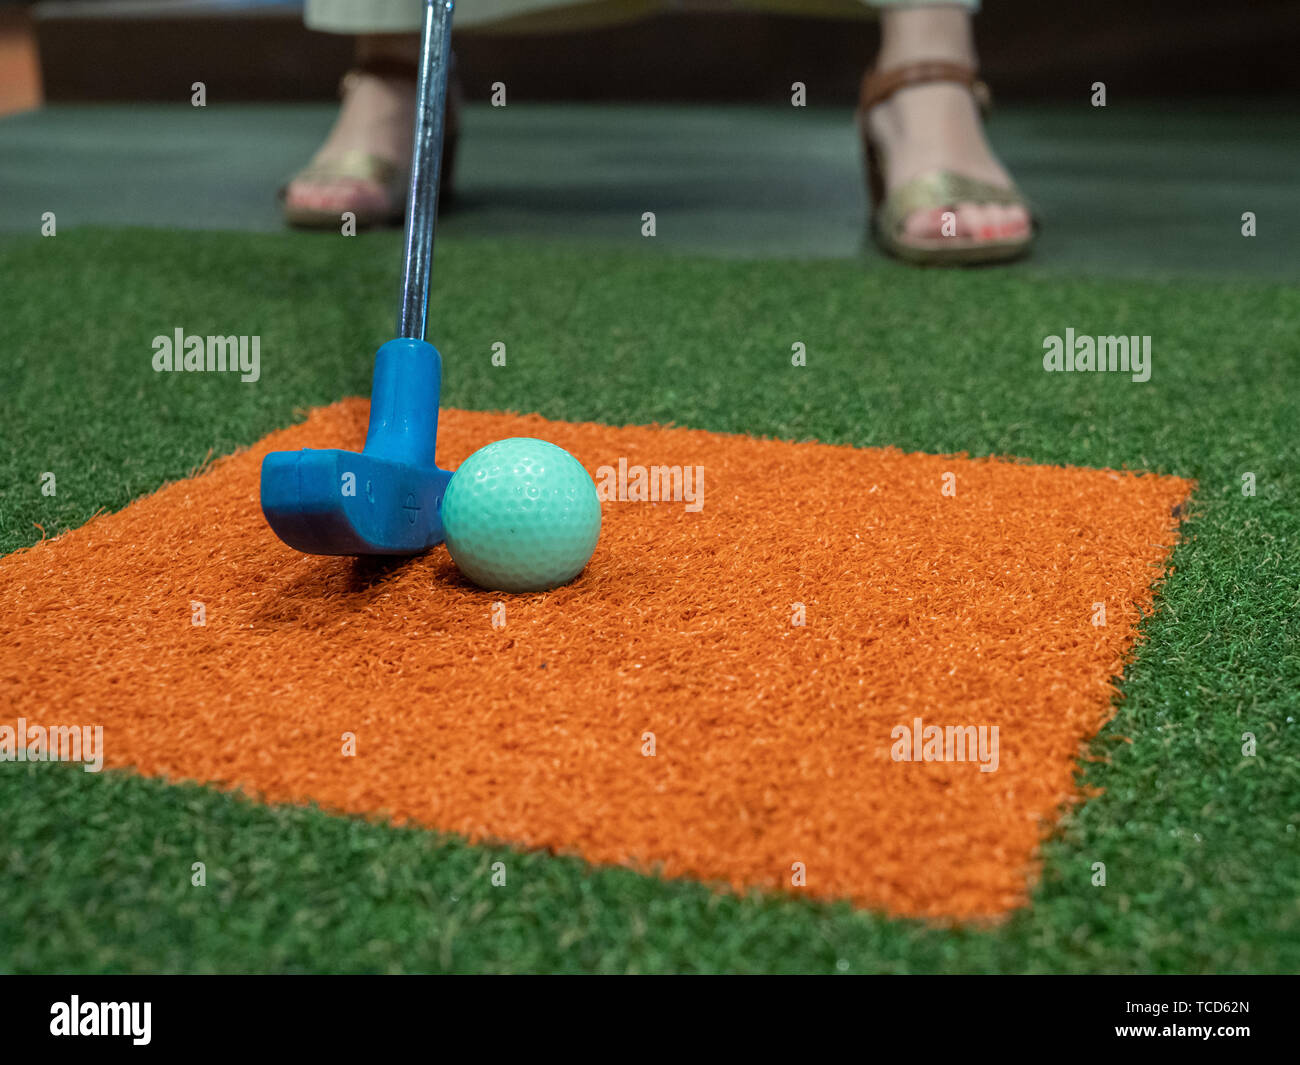 Blue putter on turf lined up next to green golf ball on miniature golf course with woman playing Stock Photo